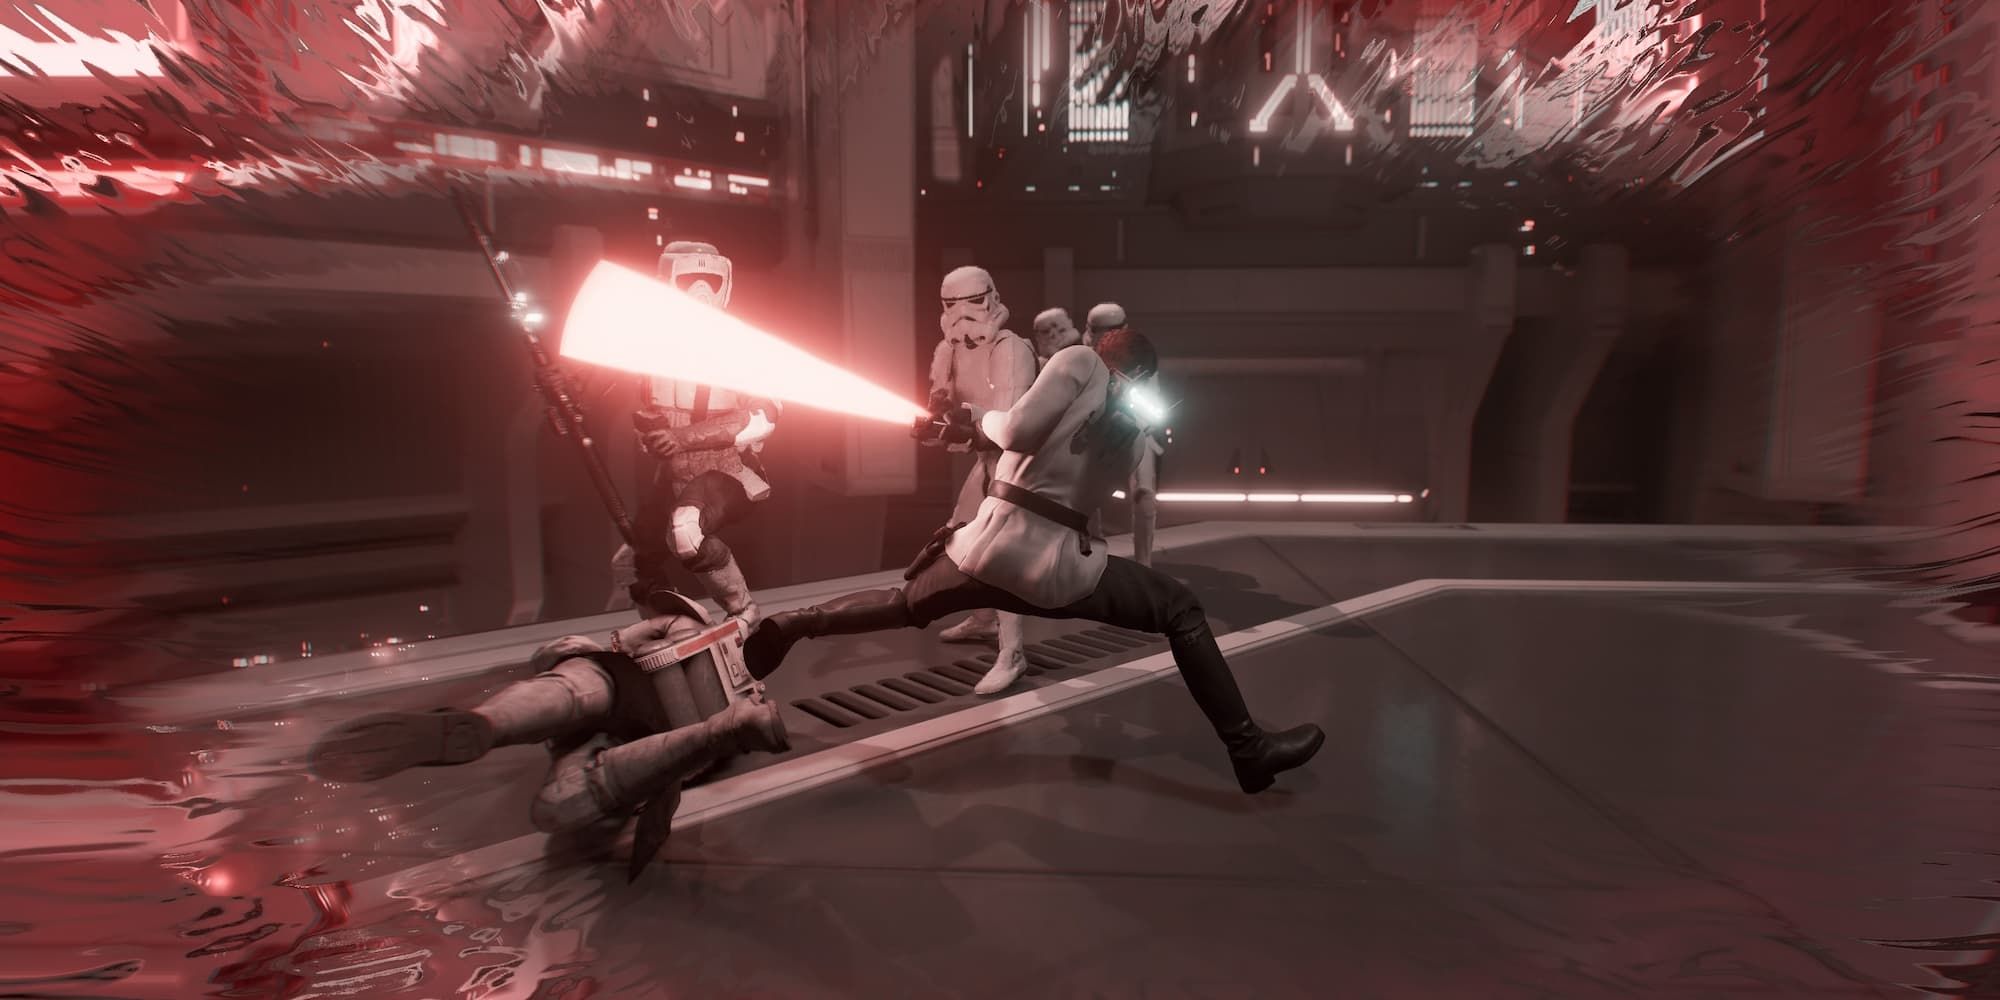 Cal embraces his darkness with his new ability in Star Wars Jedi: Survivor.